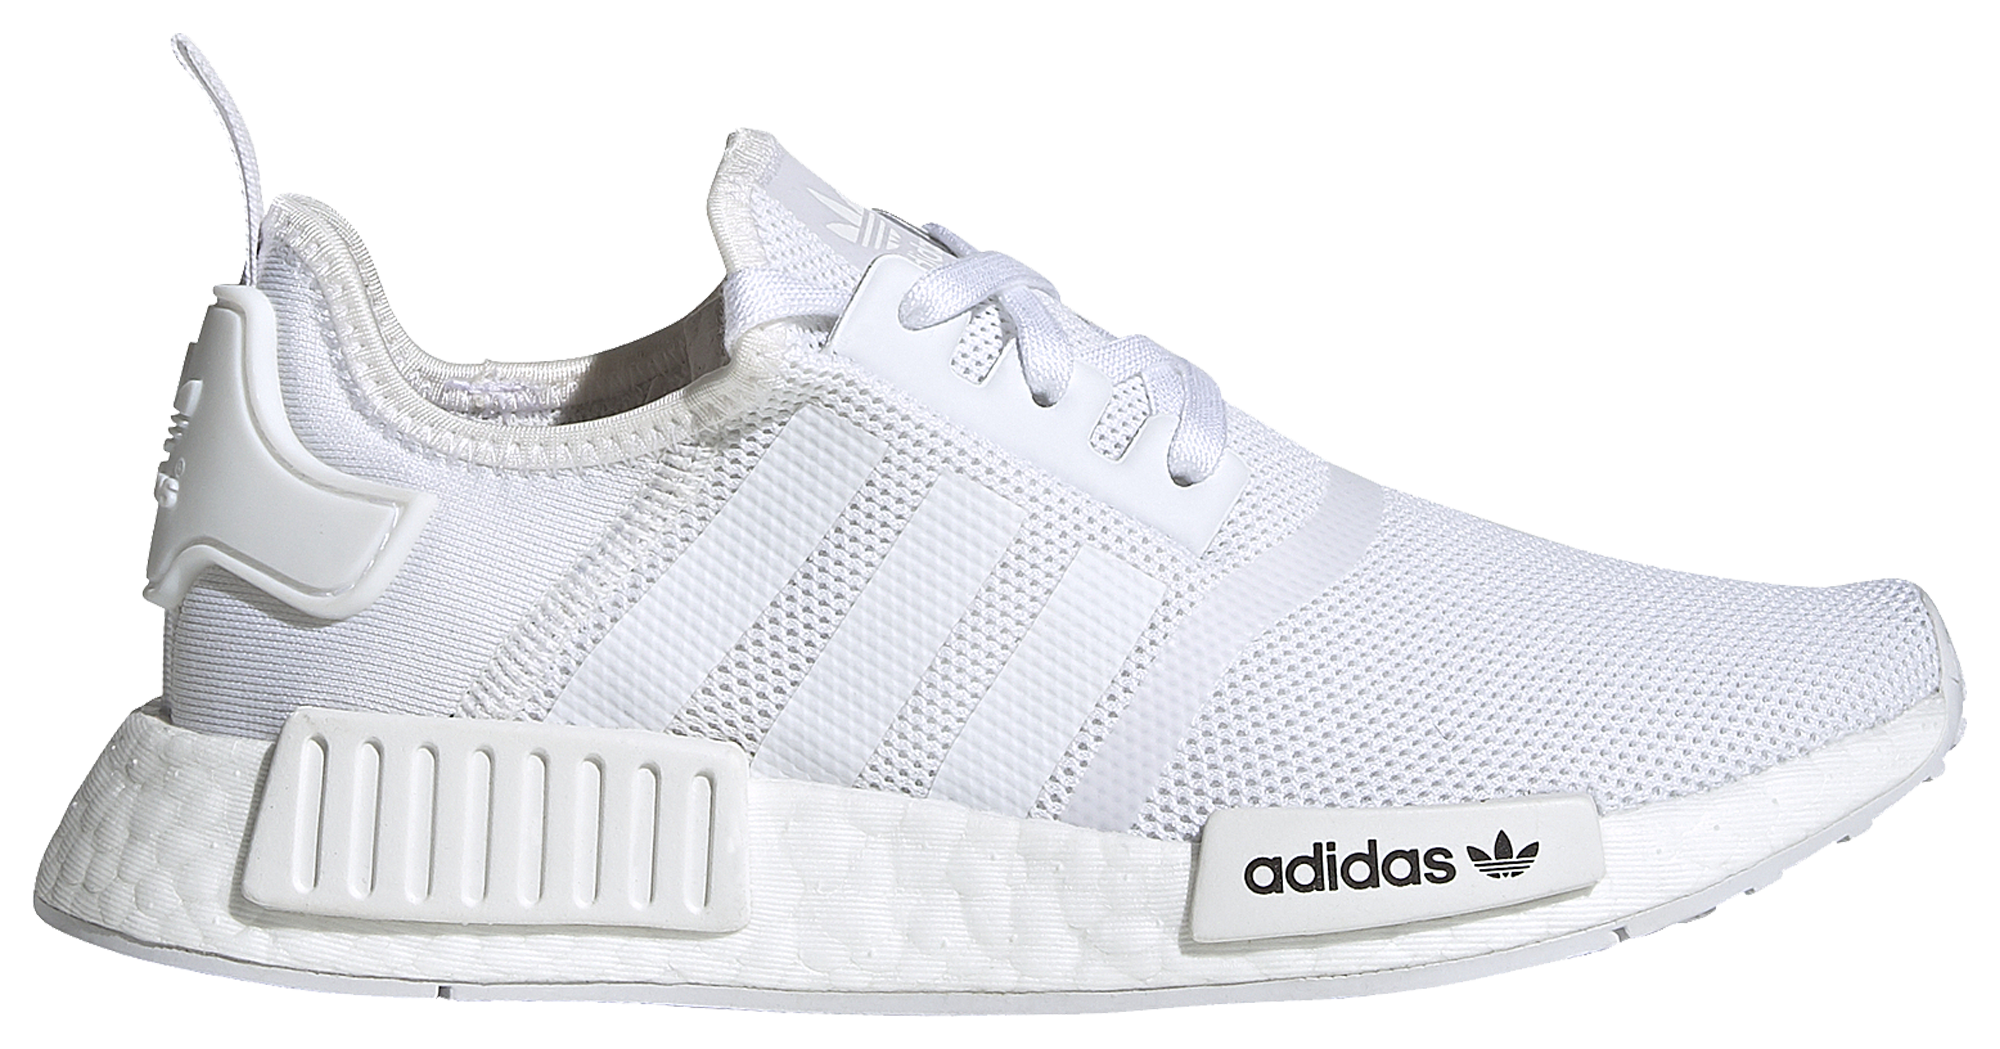 nmd shoes near me